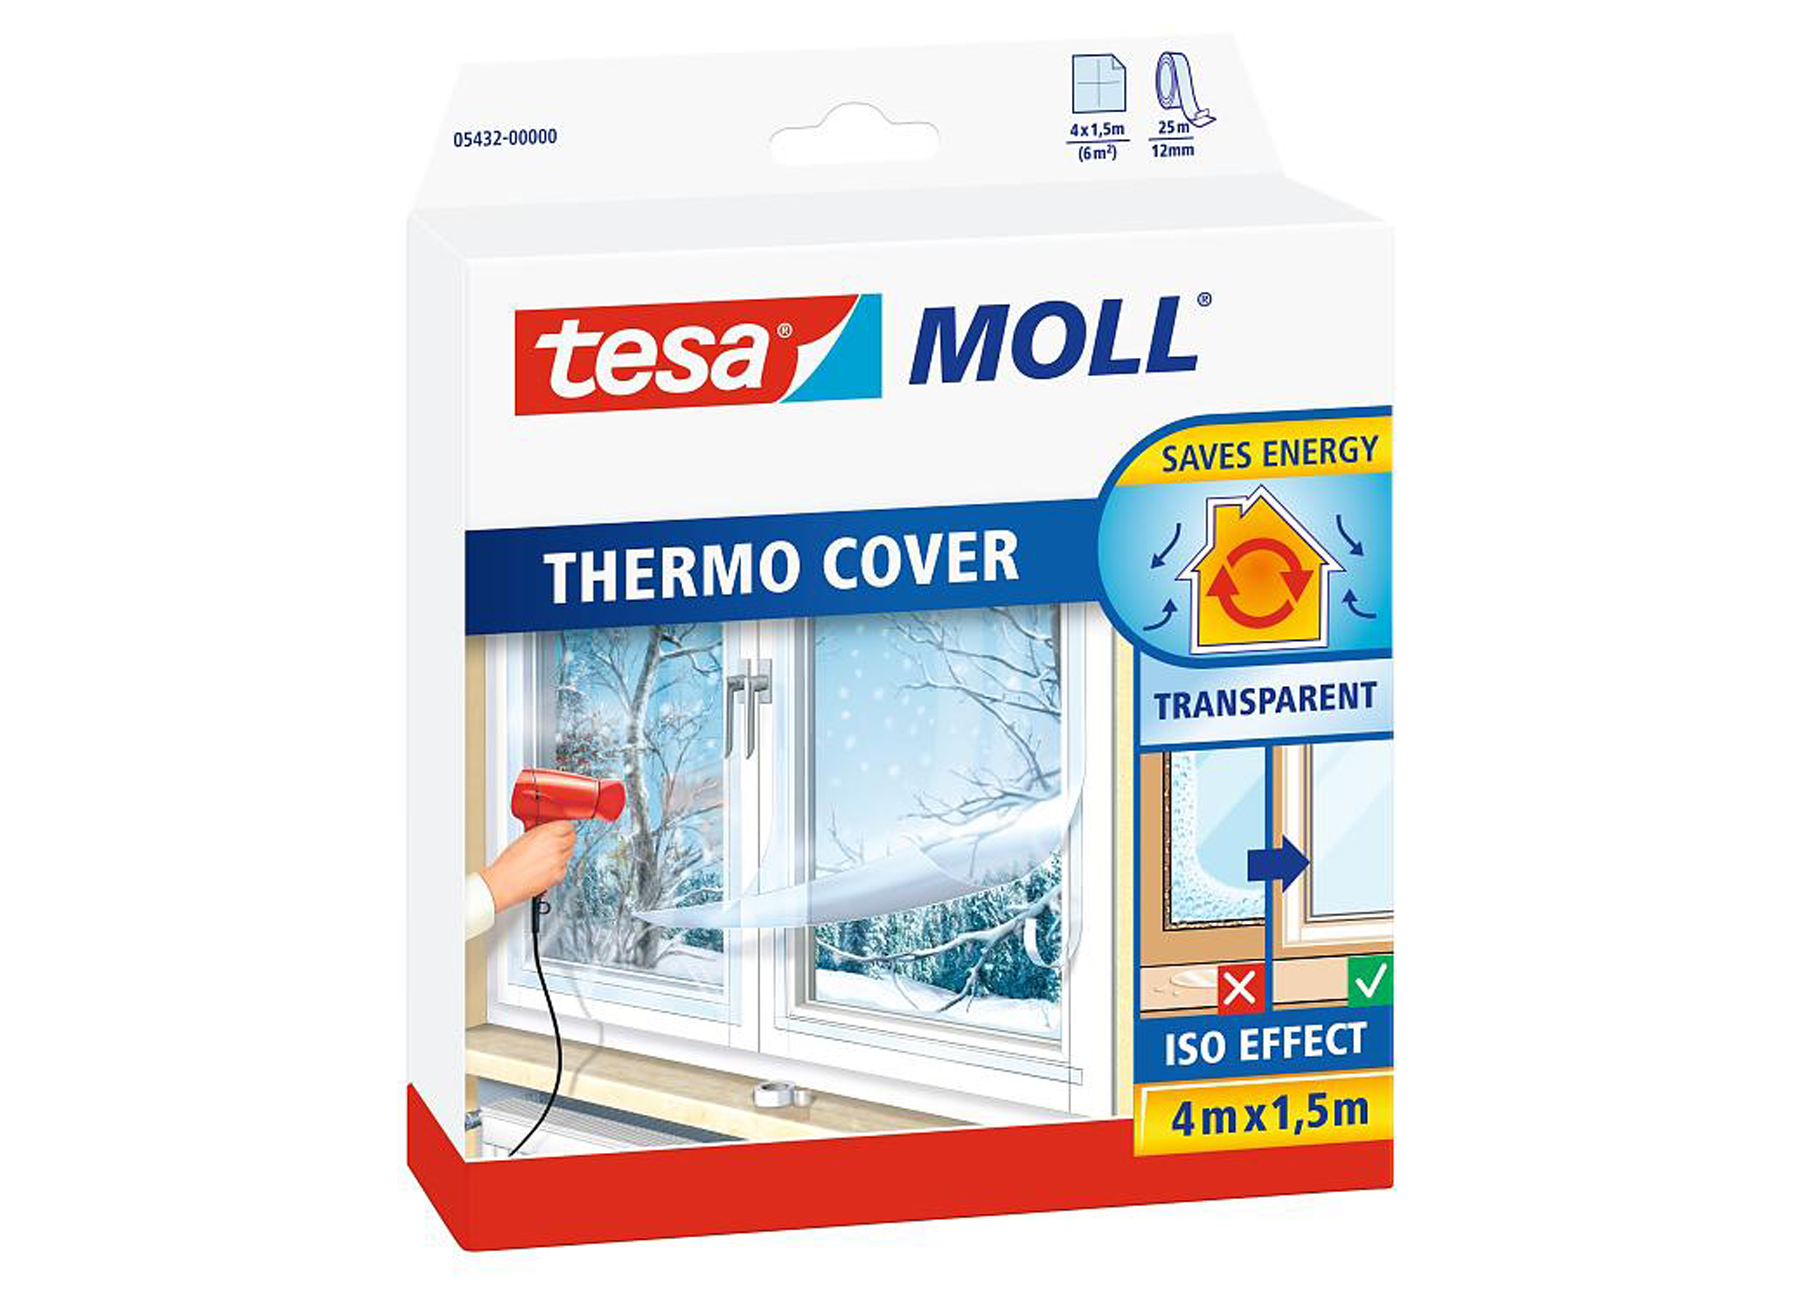 TESAMOLL THERMO COVER 6M2